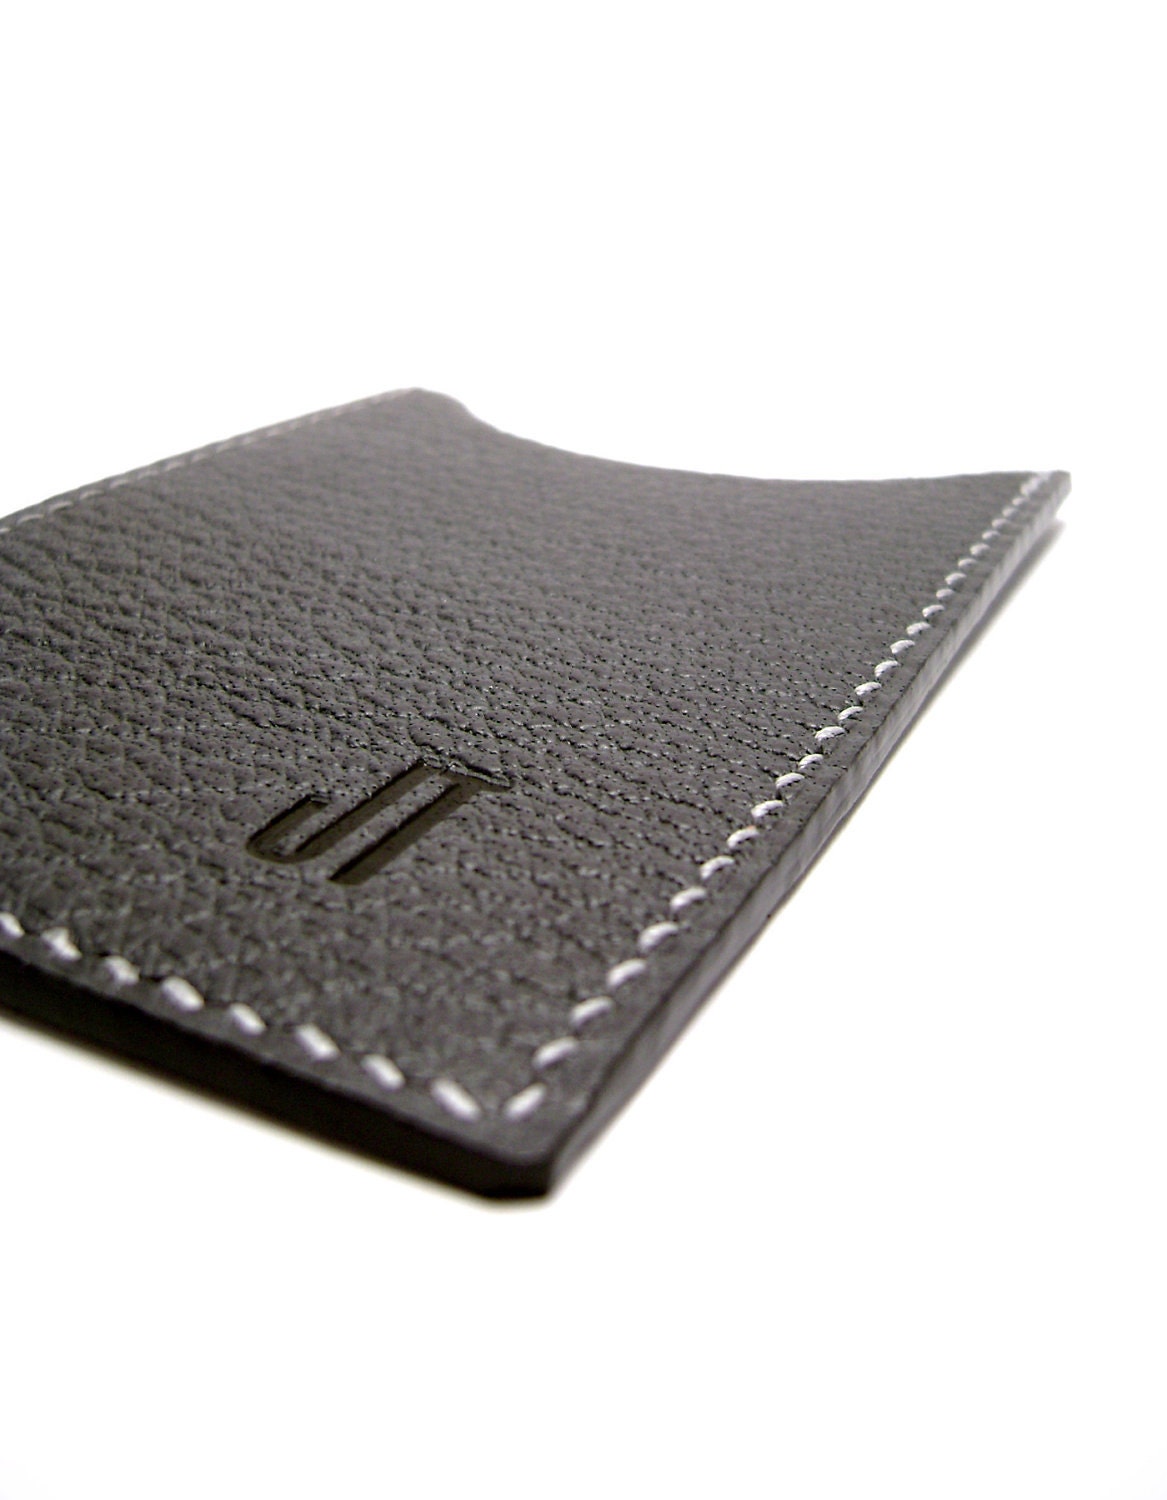 Monogrammed Charcoal Leather Card Case, Vertical, gray, personalized, card holder - sakao